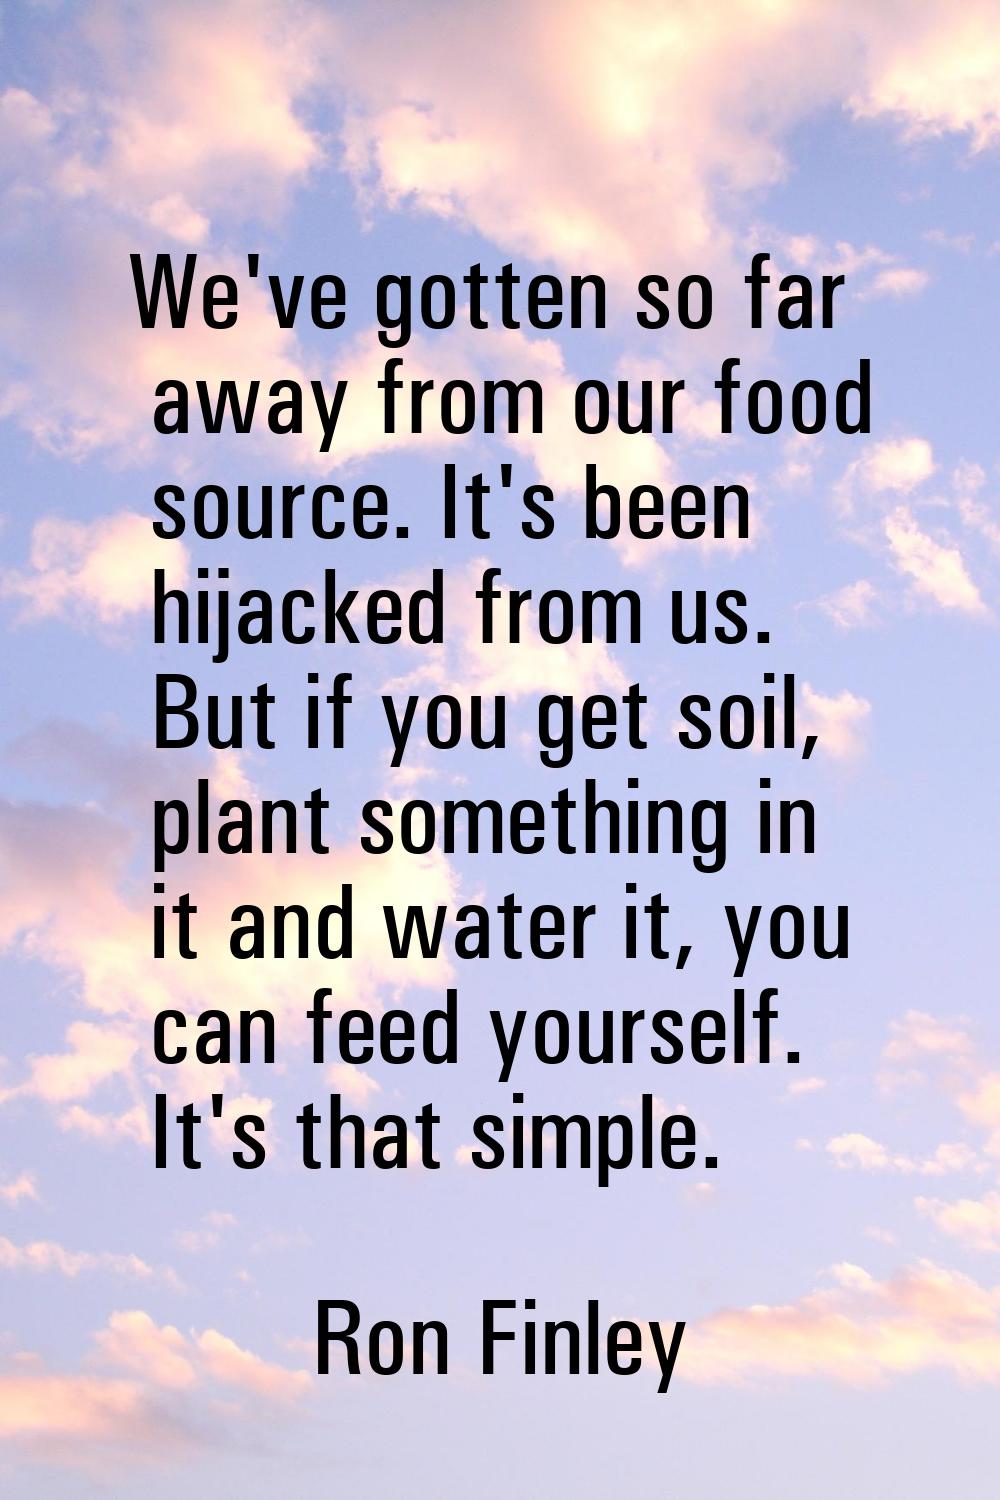 We've gotten so far away from our food source. It's been hijacked from us. But if you get soil, pla